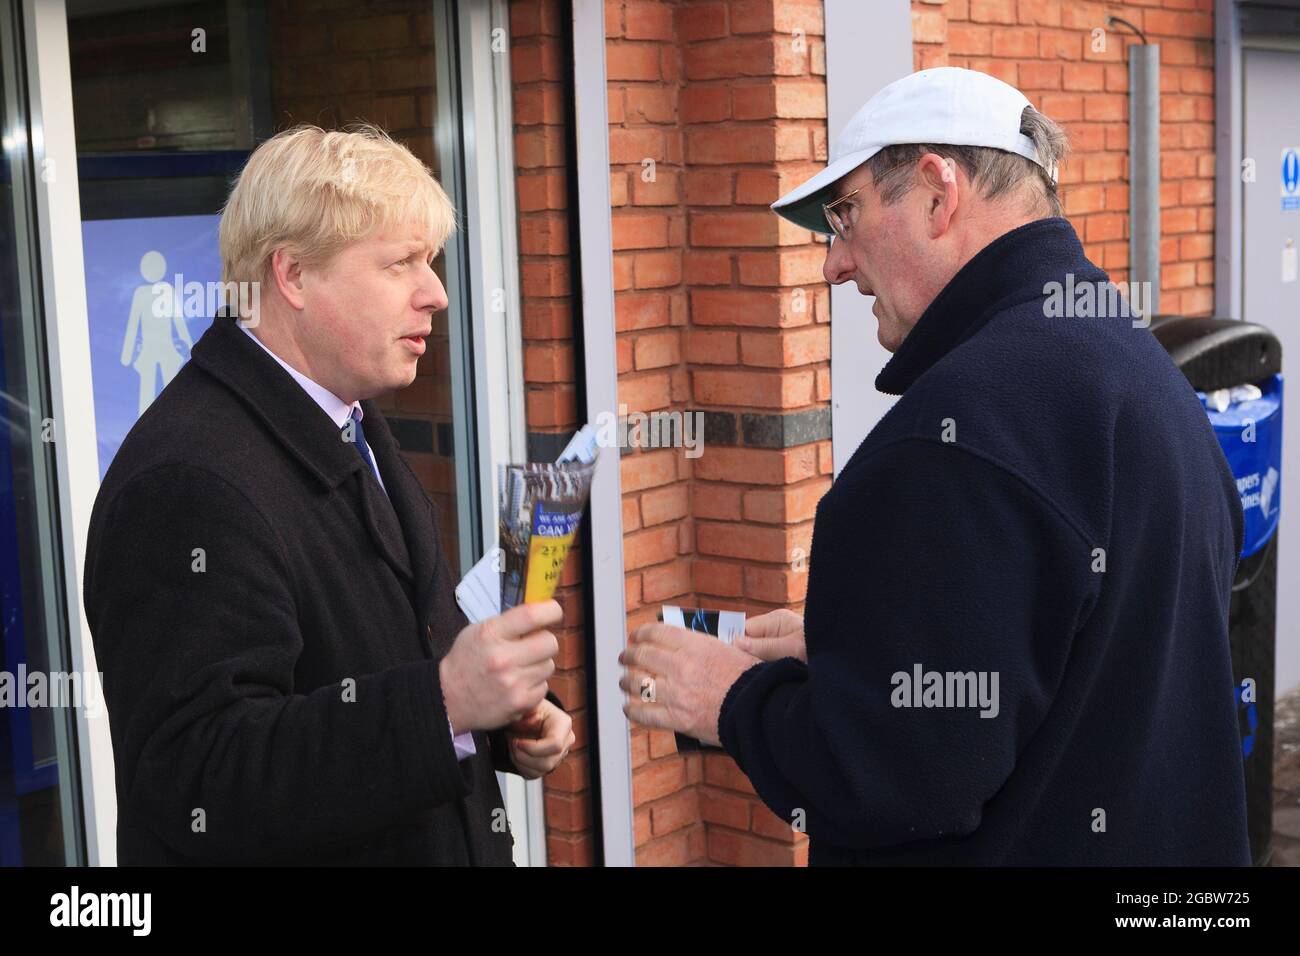 Boris Johnson, conservative candidate for Mayor of London speaking with commuters at Crayford station. Before traveling up to Waterloo East. His journey was to see what traveling conditions are like rail commuters coming from southern suburbs into central London.  Crayford station, London, UK.  25 Feb 2008 Stock Photo